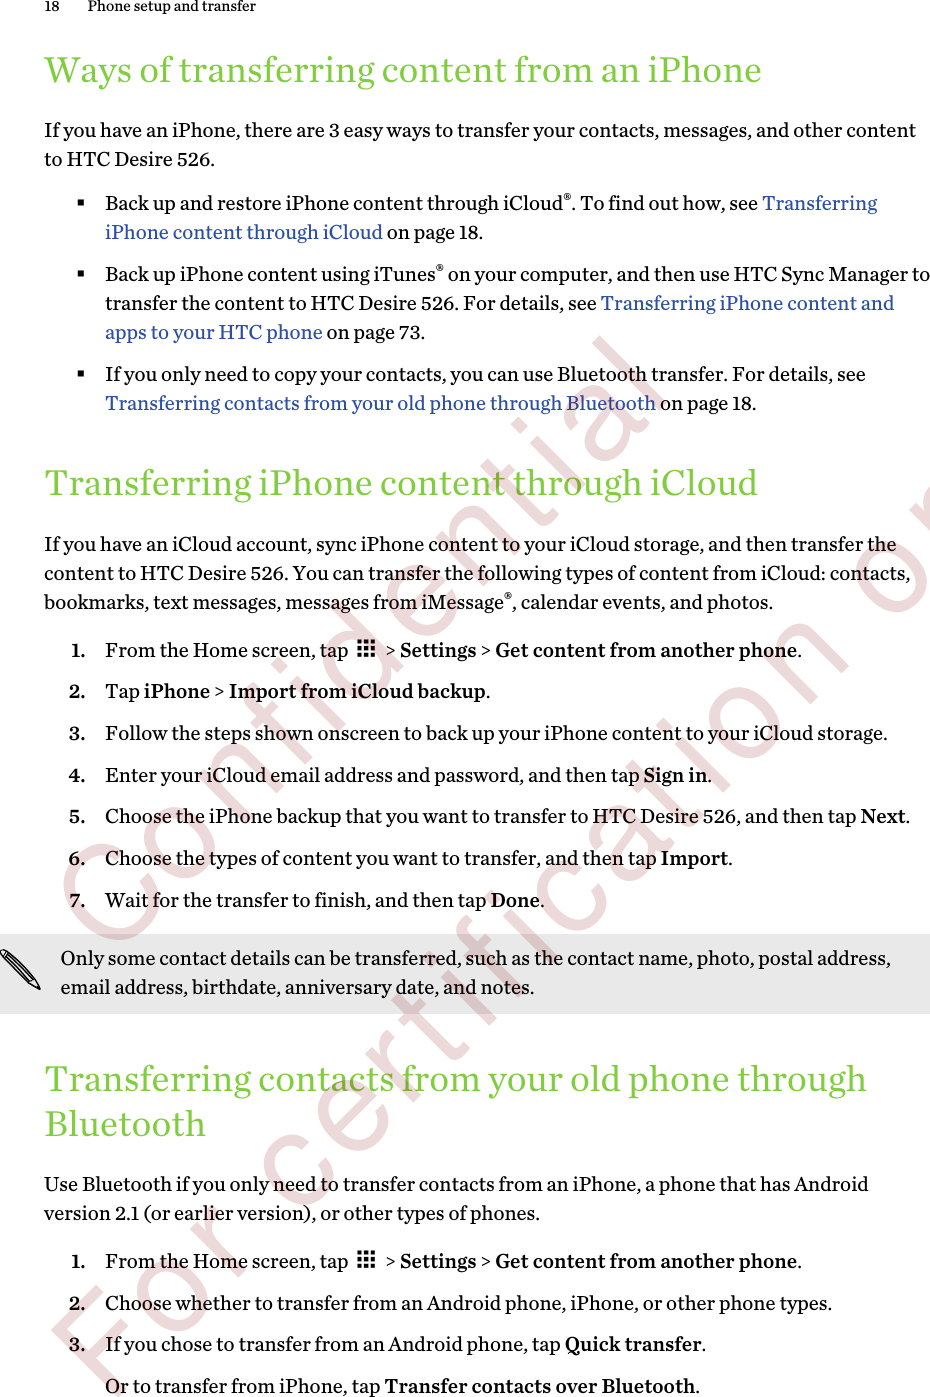 Ways of transferring content from an iPhoneIf you have an iPhone, there are 3 easy ways to transfer your contacts, messages, and other contentto HTC Desire 526.§Back up and restore iPhone content through iCloud®. To find out how, see TransferringiPhone content through iCloud on page 18.§Back up iPhone content using iTunes® on your computer, and then use HTC Sync Manager totransfer the content to HTC Desire 526. For details, see Transferring iPhone content andapps to your HTC phone on page 73.§If you only need to copy your contacts, you can use Bluetooth transfer. For details, see Transferring contacts from your old phone through Bluetooth on page 18.Transferring iPhone content through iCloudIf you have an iCloud account, sync iPhone content to your iCloud storage, and then transfer thecontent to HTC Desire 526. You can transfer the following types of content from iCloud: contacts,bookmarks, text messages, messages from iMessage®, calendar events, and photos.1. From the Home screen, tap   &gt; Settings &gt; Get content from another phone.2. Tap iPhone &gt; Import from iCloud backup.3. Follow the steps shown onscreen to back up your iPhone content to your iCloud storage.4. Enter your iCloud email address and password, and then tap Sign in.5. Choose the iPhone backup that you want to transfer to HTC Desire 526, and then tap Next.6. Choose the types of content you want to transfer, and then tap Import.7. Wait for the transfer to finish, and then tap Done.Only some contact details can be transferred, such as the contact name, photo, postal address,email address, birthdate, anniversary date, and notes.Transferring contacts from your old phone throughBluetoothUse Bluetooth if you only need to transfer contacts from an iPhone, a phone that has Androidversion 2.1 (or earlier version), or other types of phones.1. From the Home screen, tap   &gt; Settings &gt; Get content from another phone.2. Choose whether to transfer from an Android phone, iPhone, or other phone types.3. If you chose to transfer from an Android phone, tap Quick transfer. Or to transfer from iPhone, tap Transfer contacts over Bluetooth.18 Phone setup and transfer        Confidential  For certification only